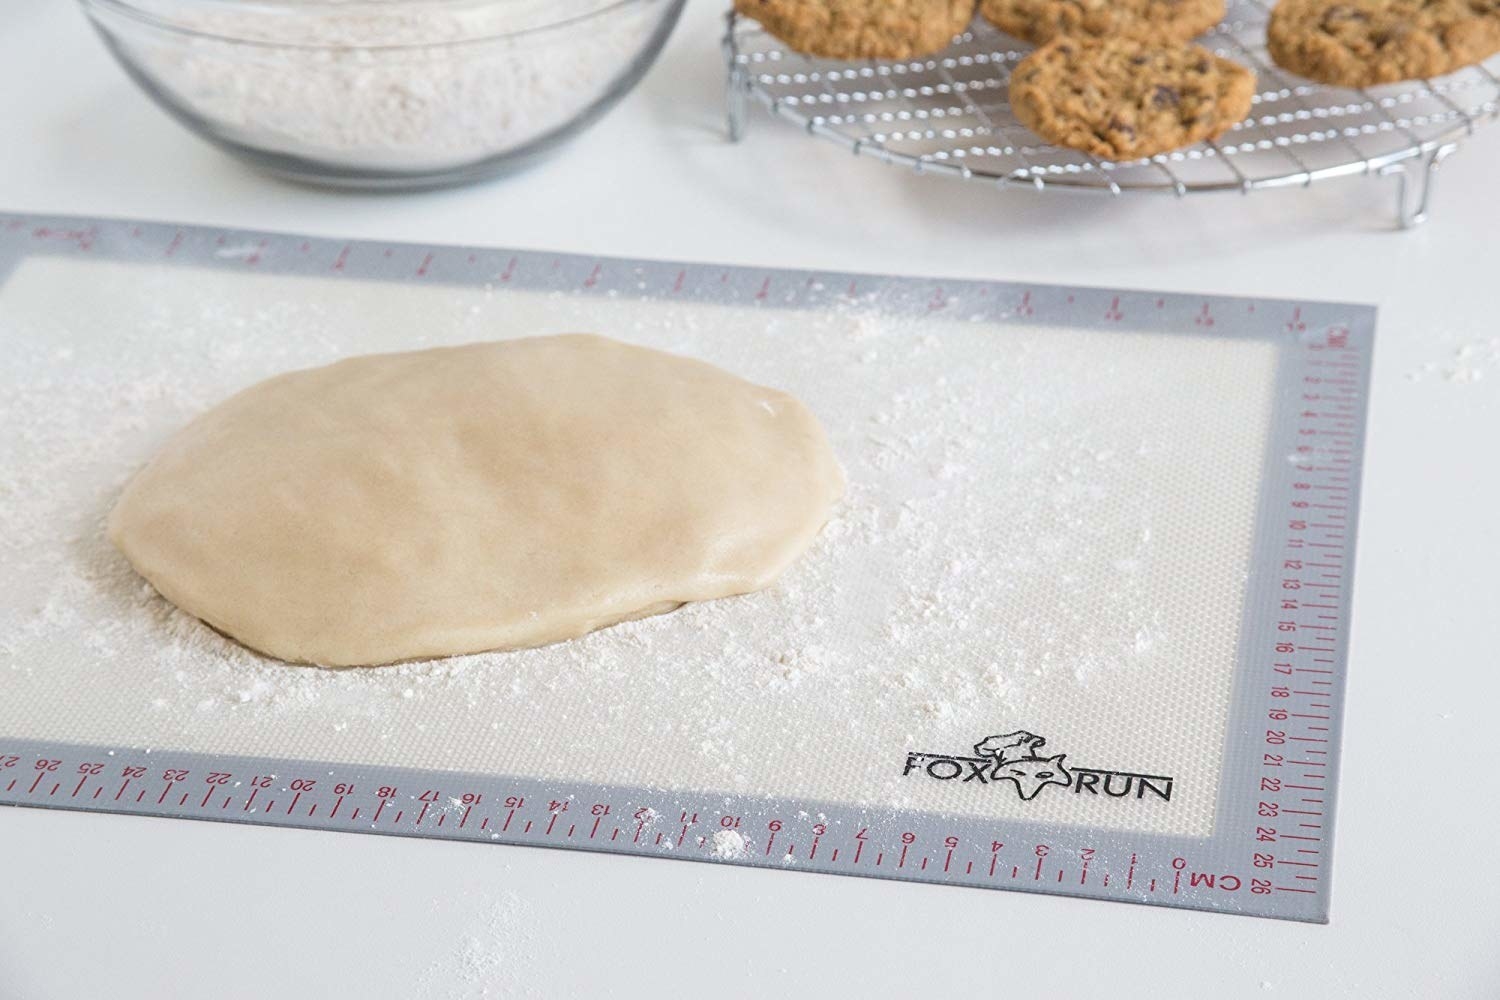 the baking mat with dough and flour, featuring measurements along the side